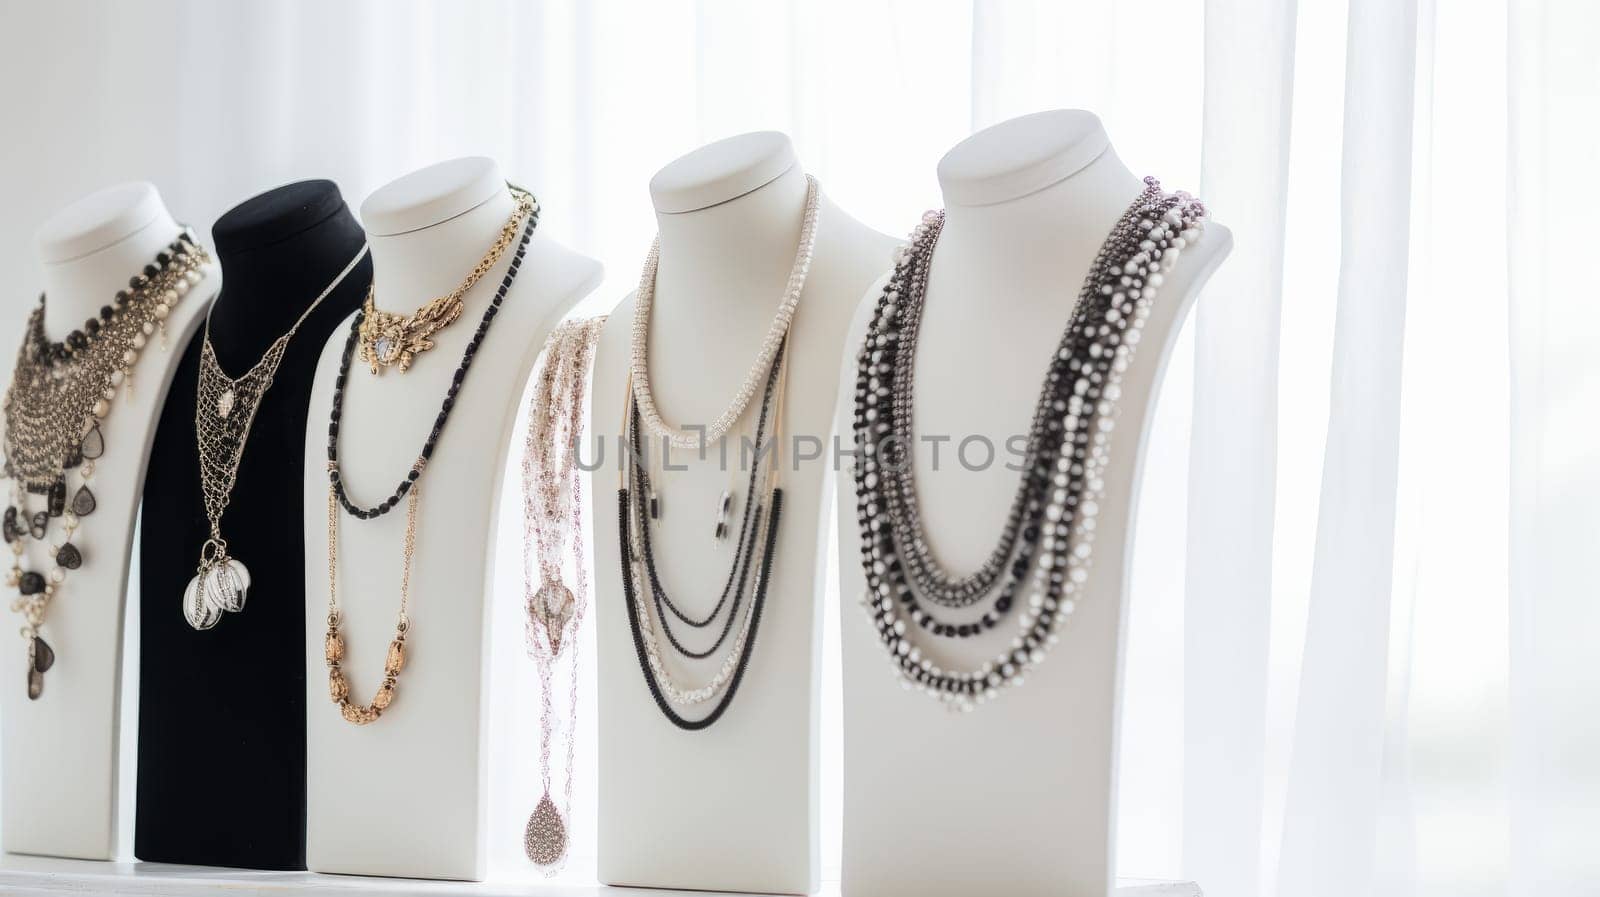 Five necklace busts on white background. Different styles and colors of necklaces. Gold, silver, pearl and black beads. Great for themes of jewelry, fashion and beauty. High quality photo